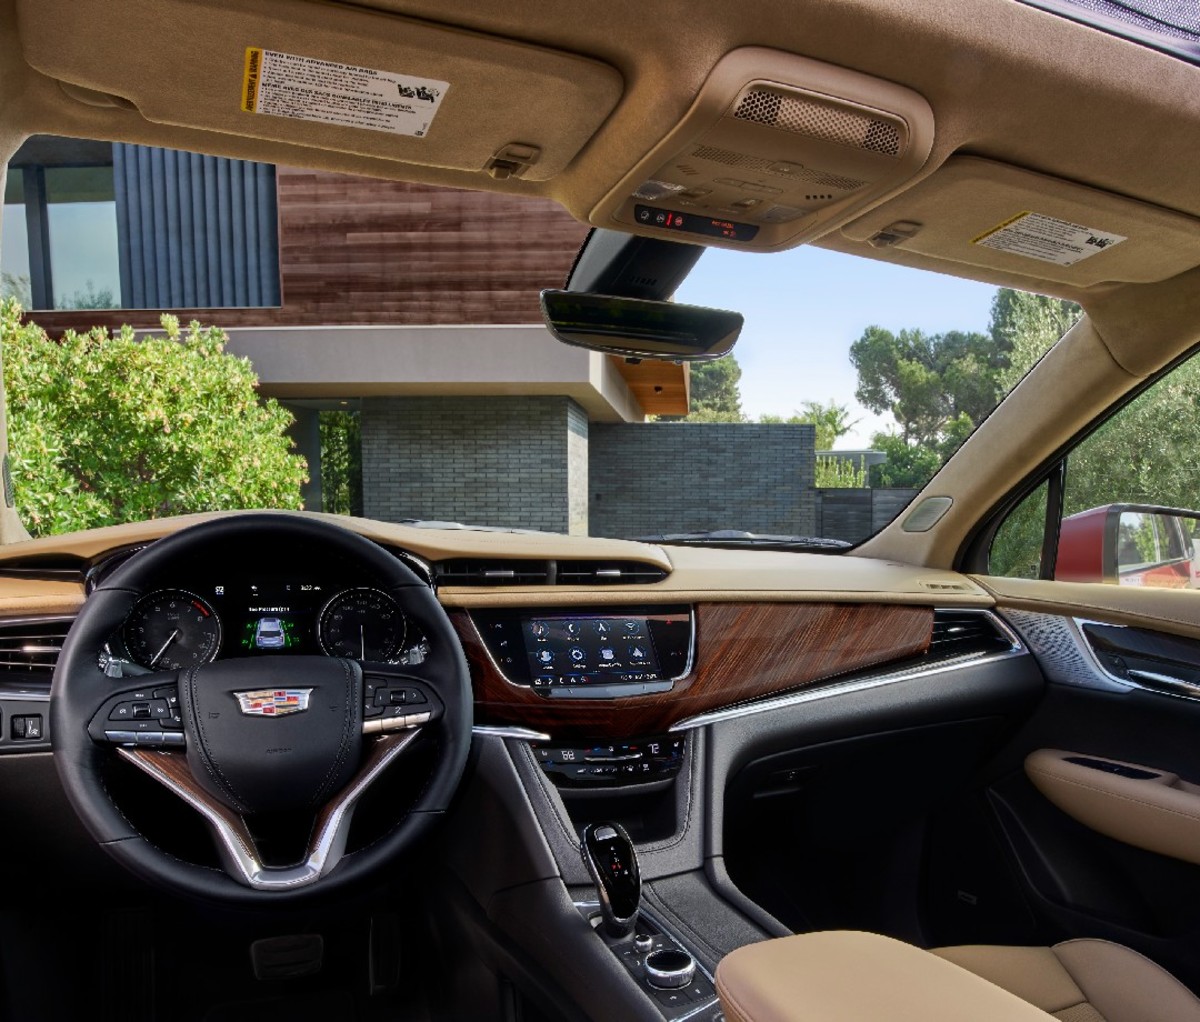 An intuitive console upfront that makes controlling the 8-inch infotainment screen a snap. The XT6 syncs with Apple and Android pretty seamlessly and USB ports are sprinkled throughout the cabin, as there is a handy wireless charger port.